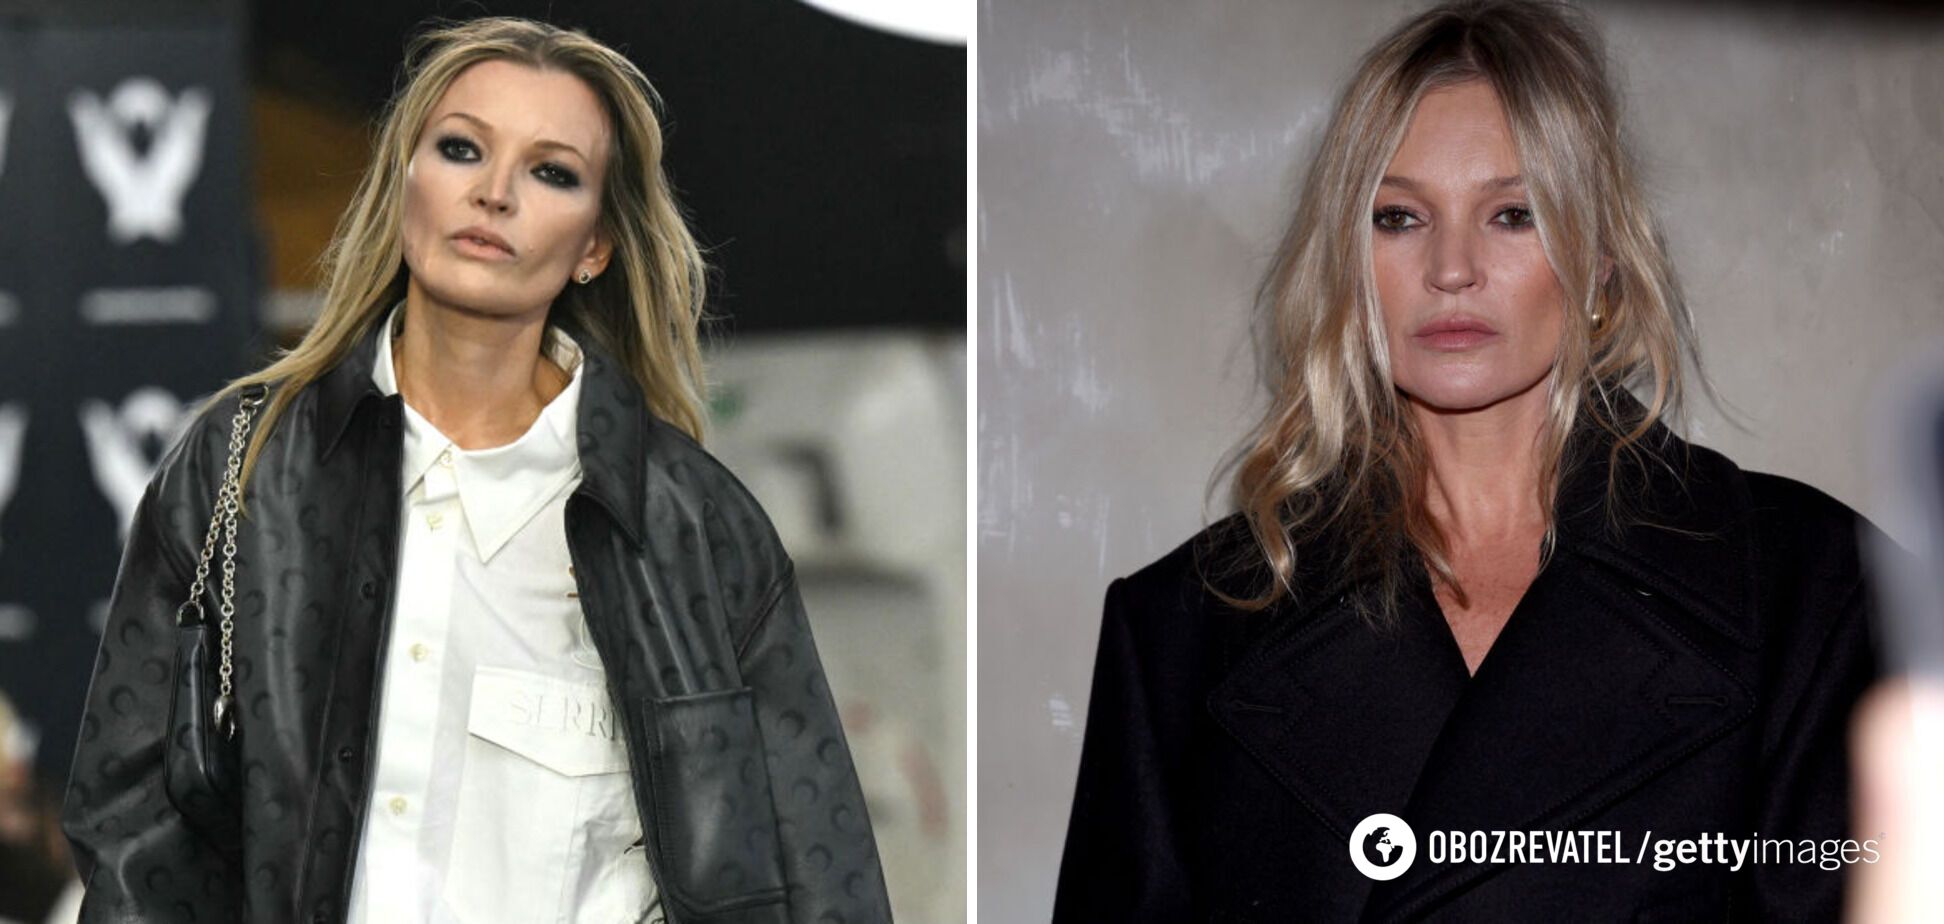 Supermodel Kate Moss's lookalike shocked the audience by appearing on the catwalk during Paris Fashion Week. Photos and videos